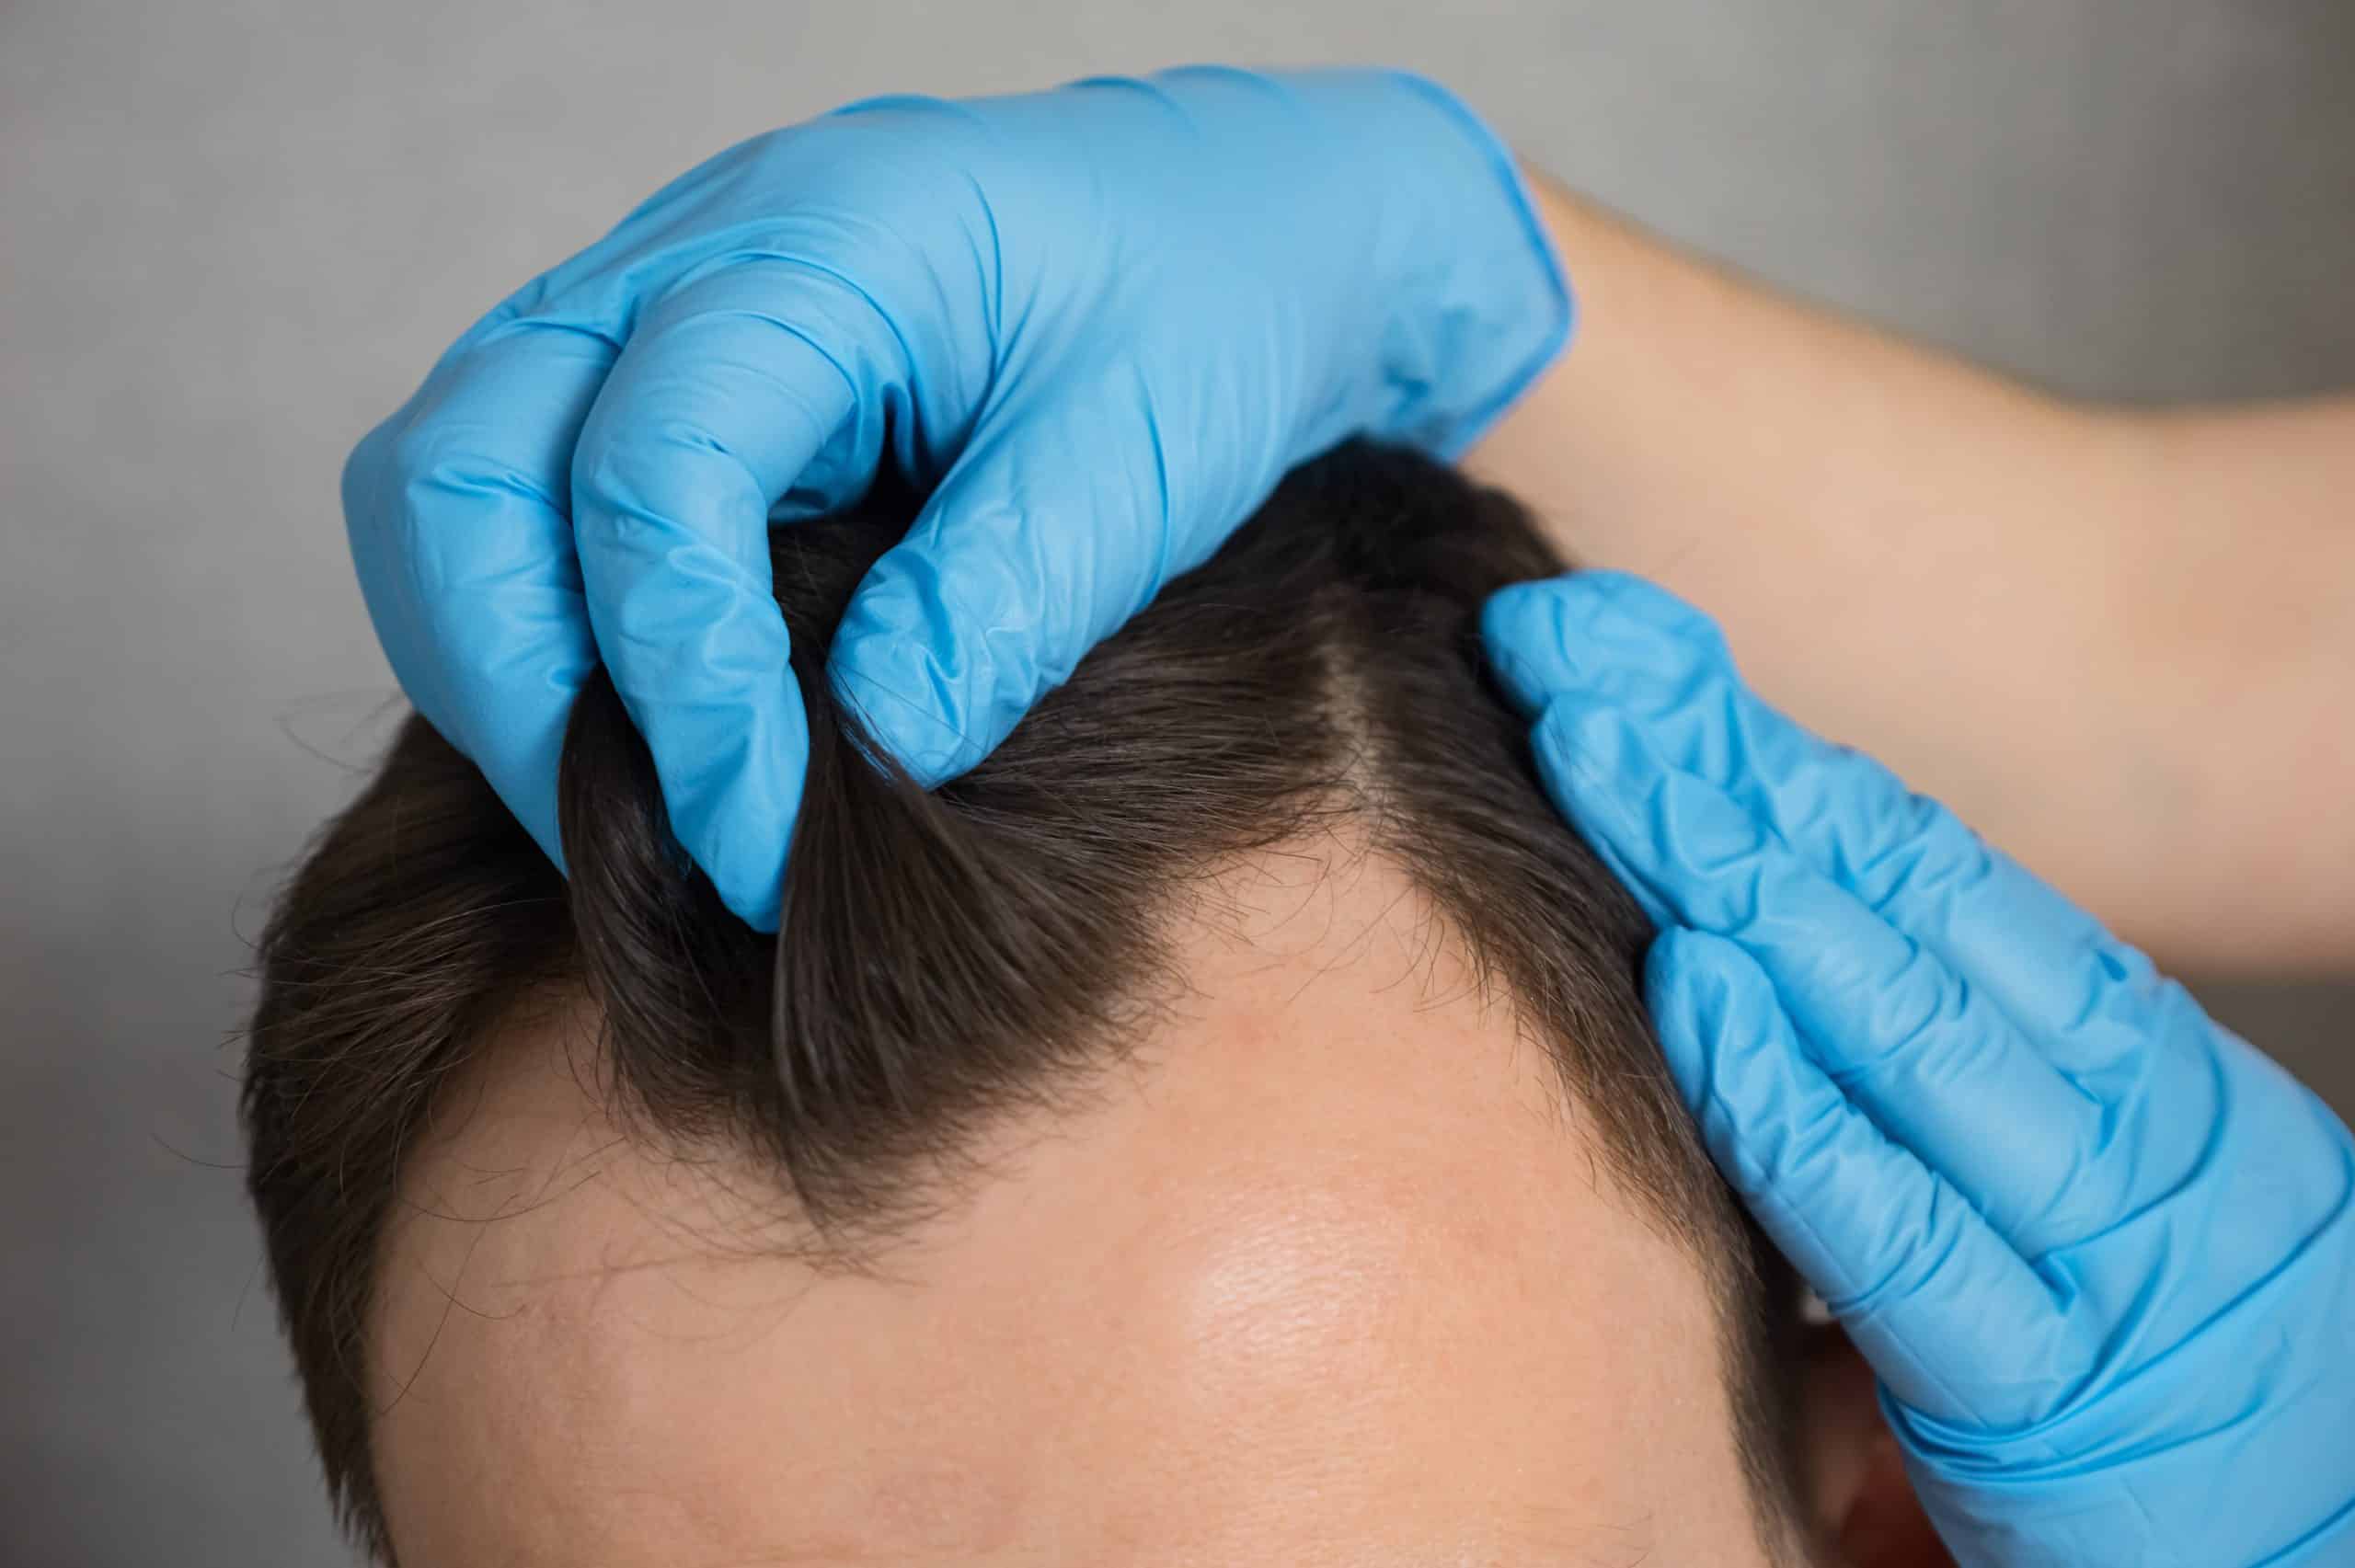 Man preparing for a hair transplant between FUE and FUT